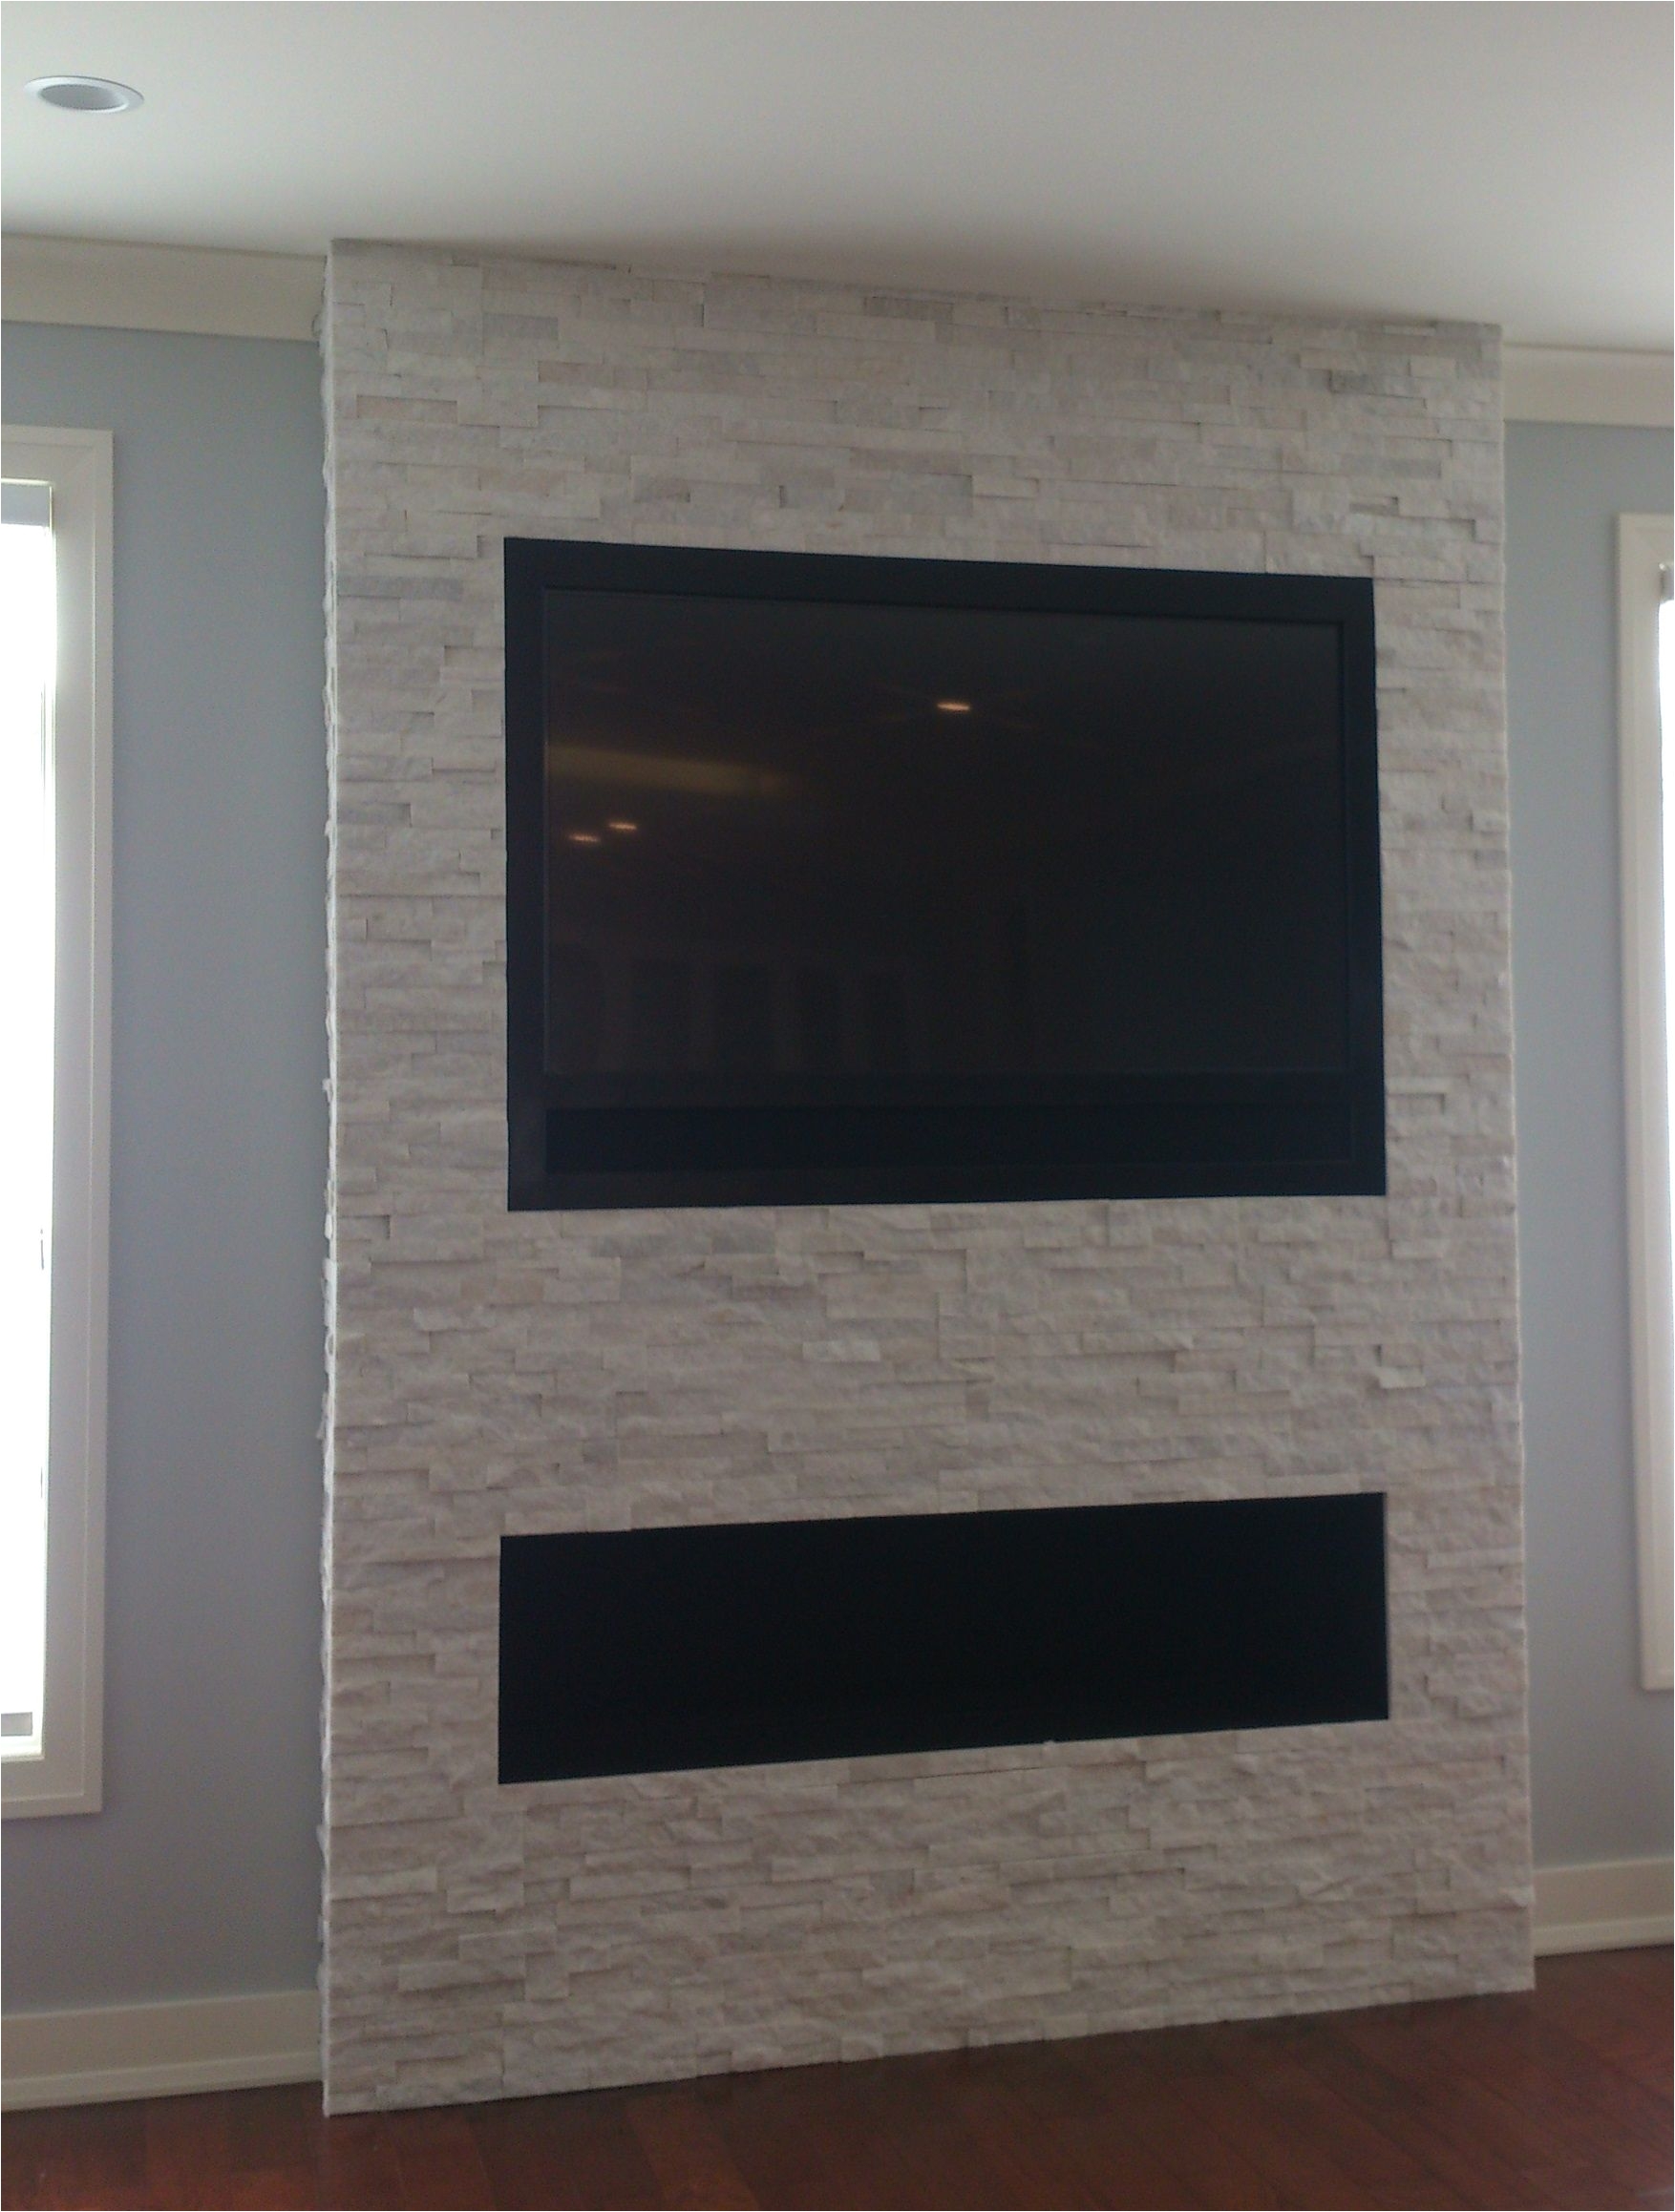 Fireplace Mantels with Tv Above Fresh Gas Fireplace without Mantle Wondering How to Mount A Tv